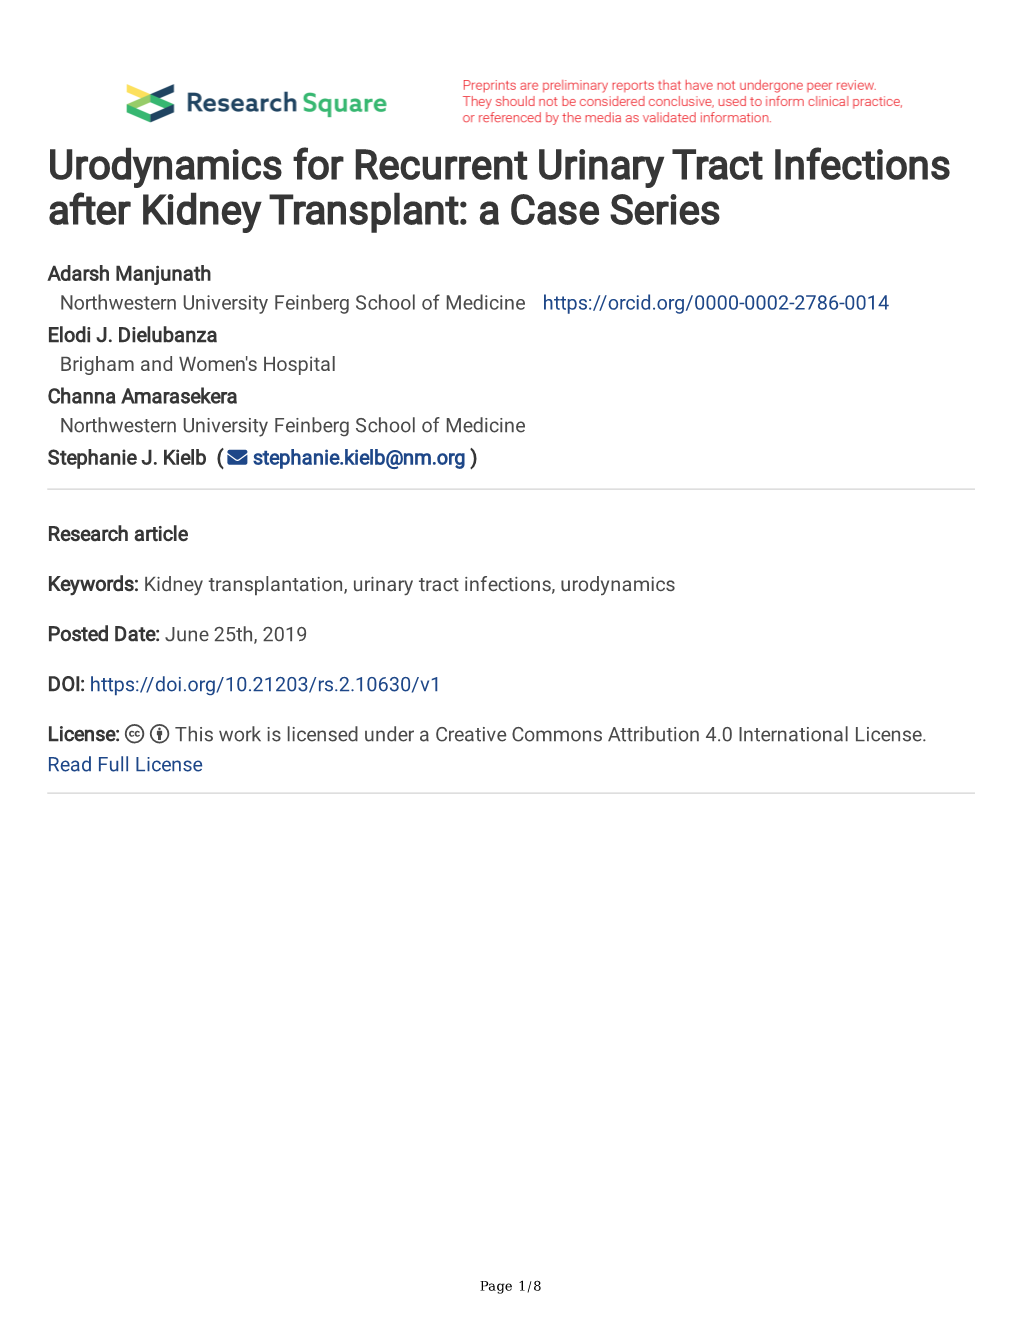 Urodynamics for Recurrent Urinary Tract Infections After Kidney Transplant: a Case Series